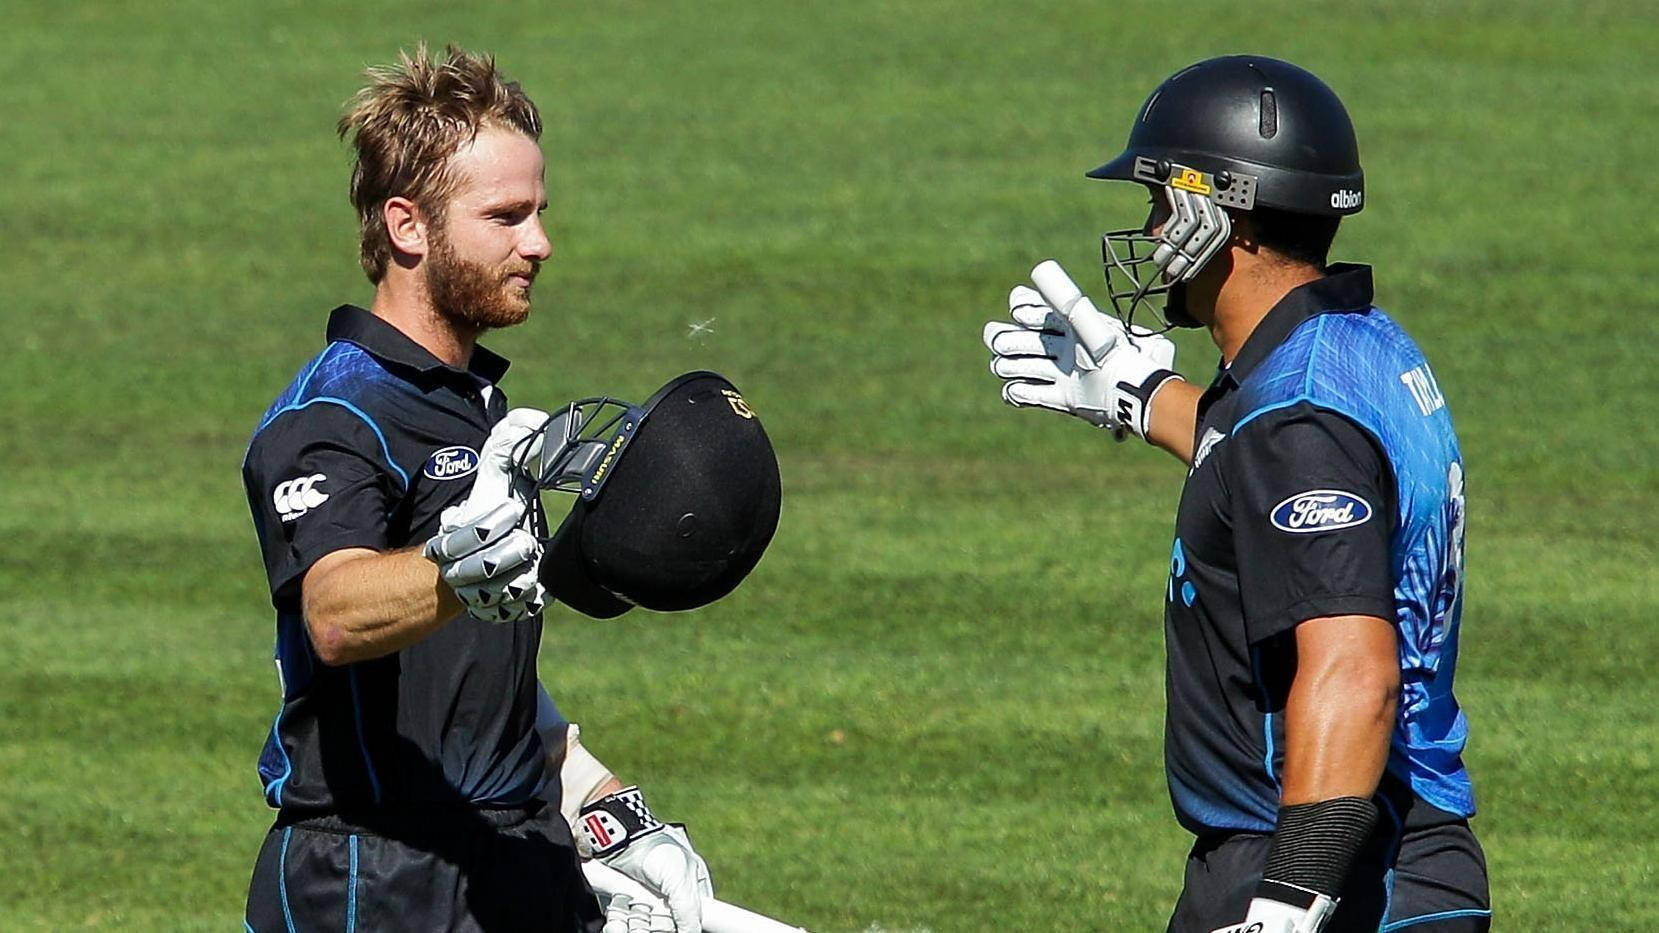 Kanewilliamson High Five Could Be Translated To German As 